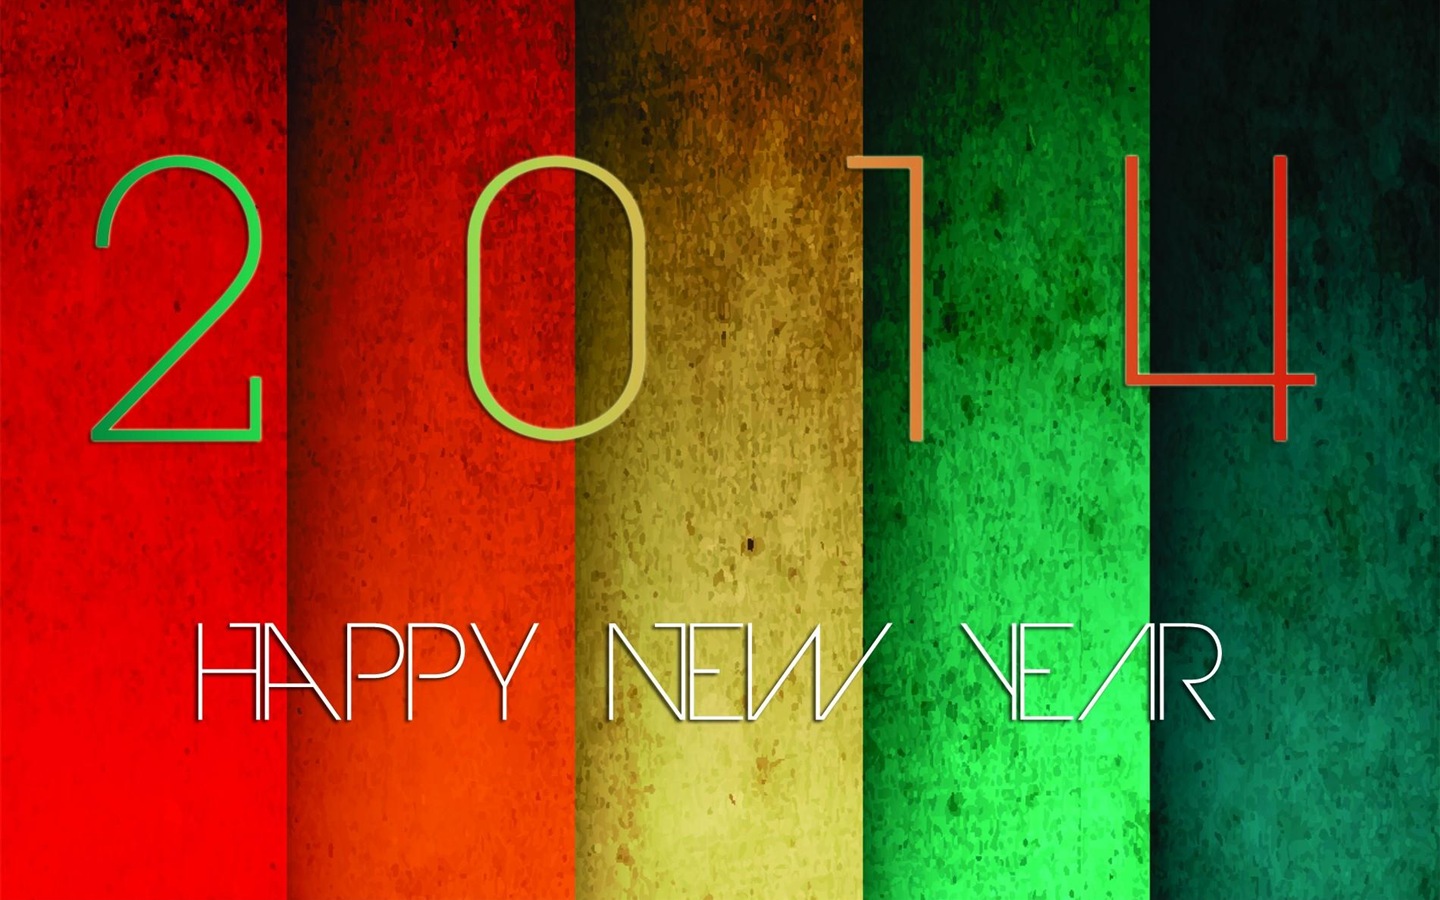 2014 New Year Theme HD Wallpapers (2) #3 - 1440x900